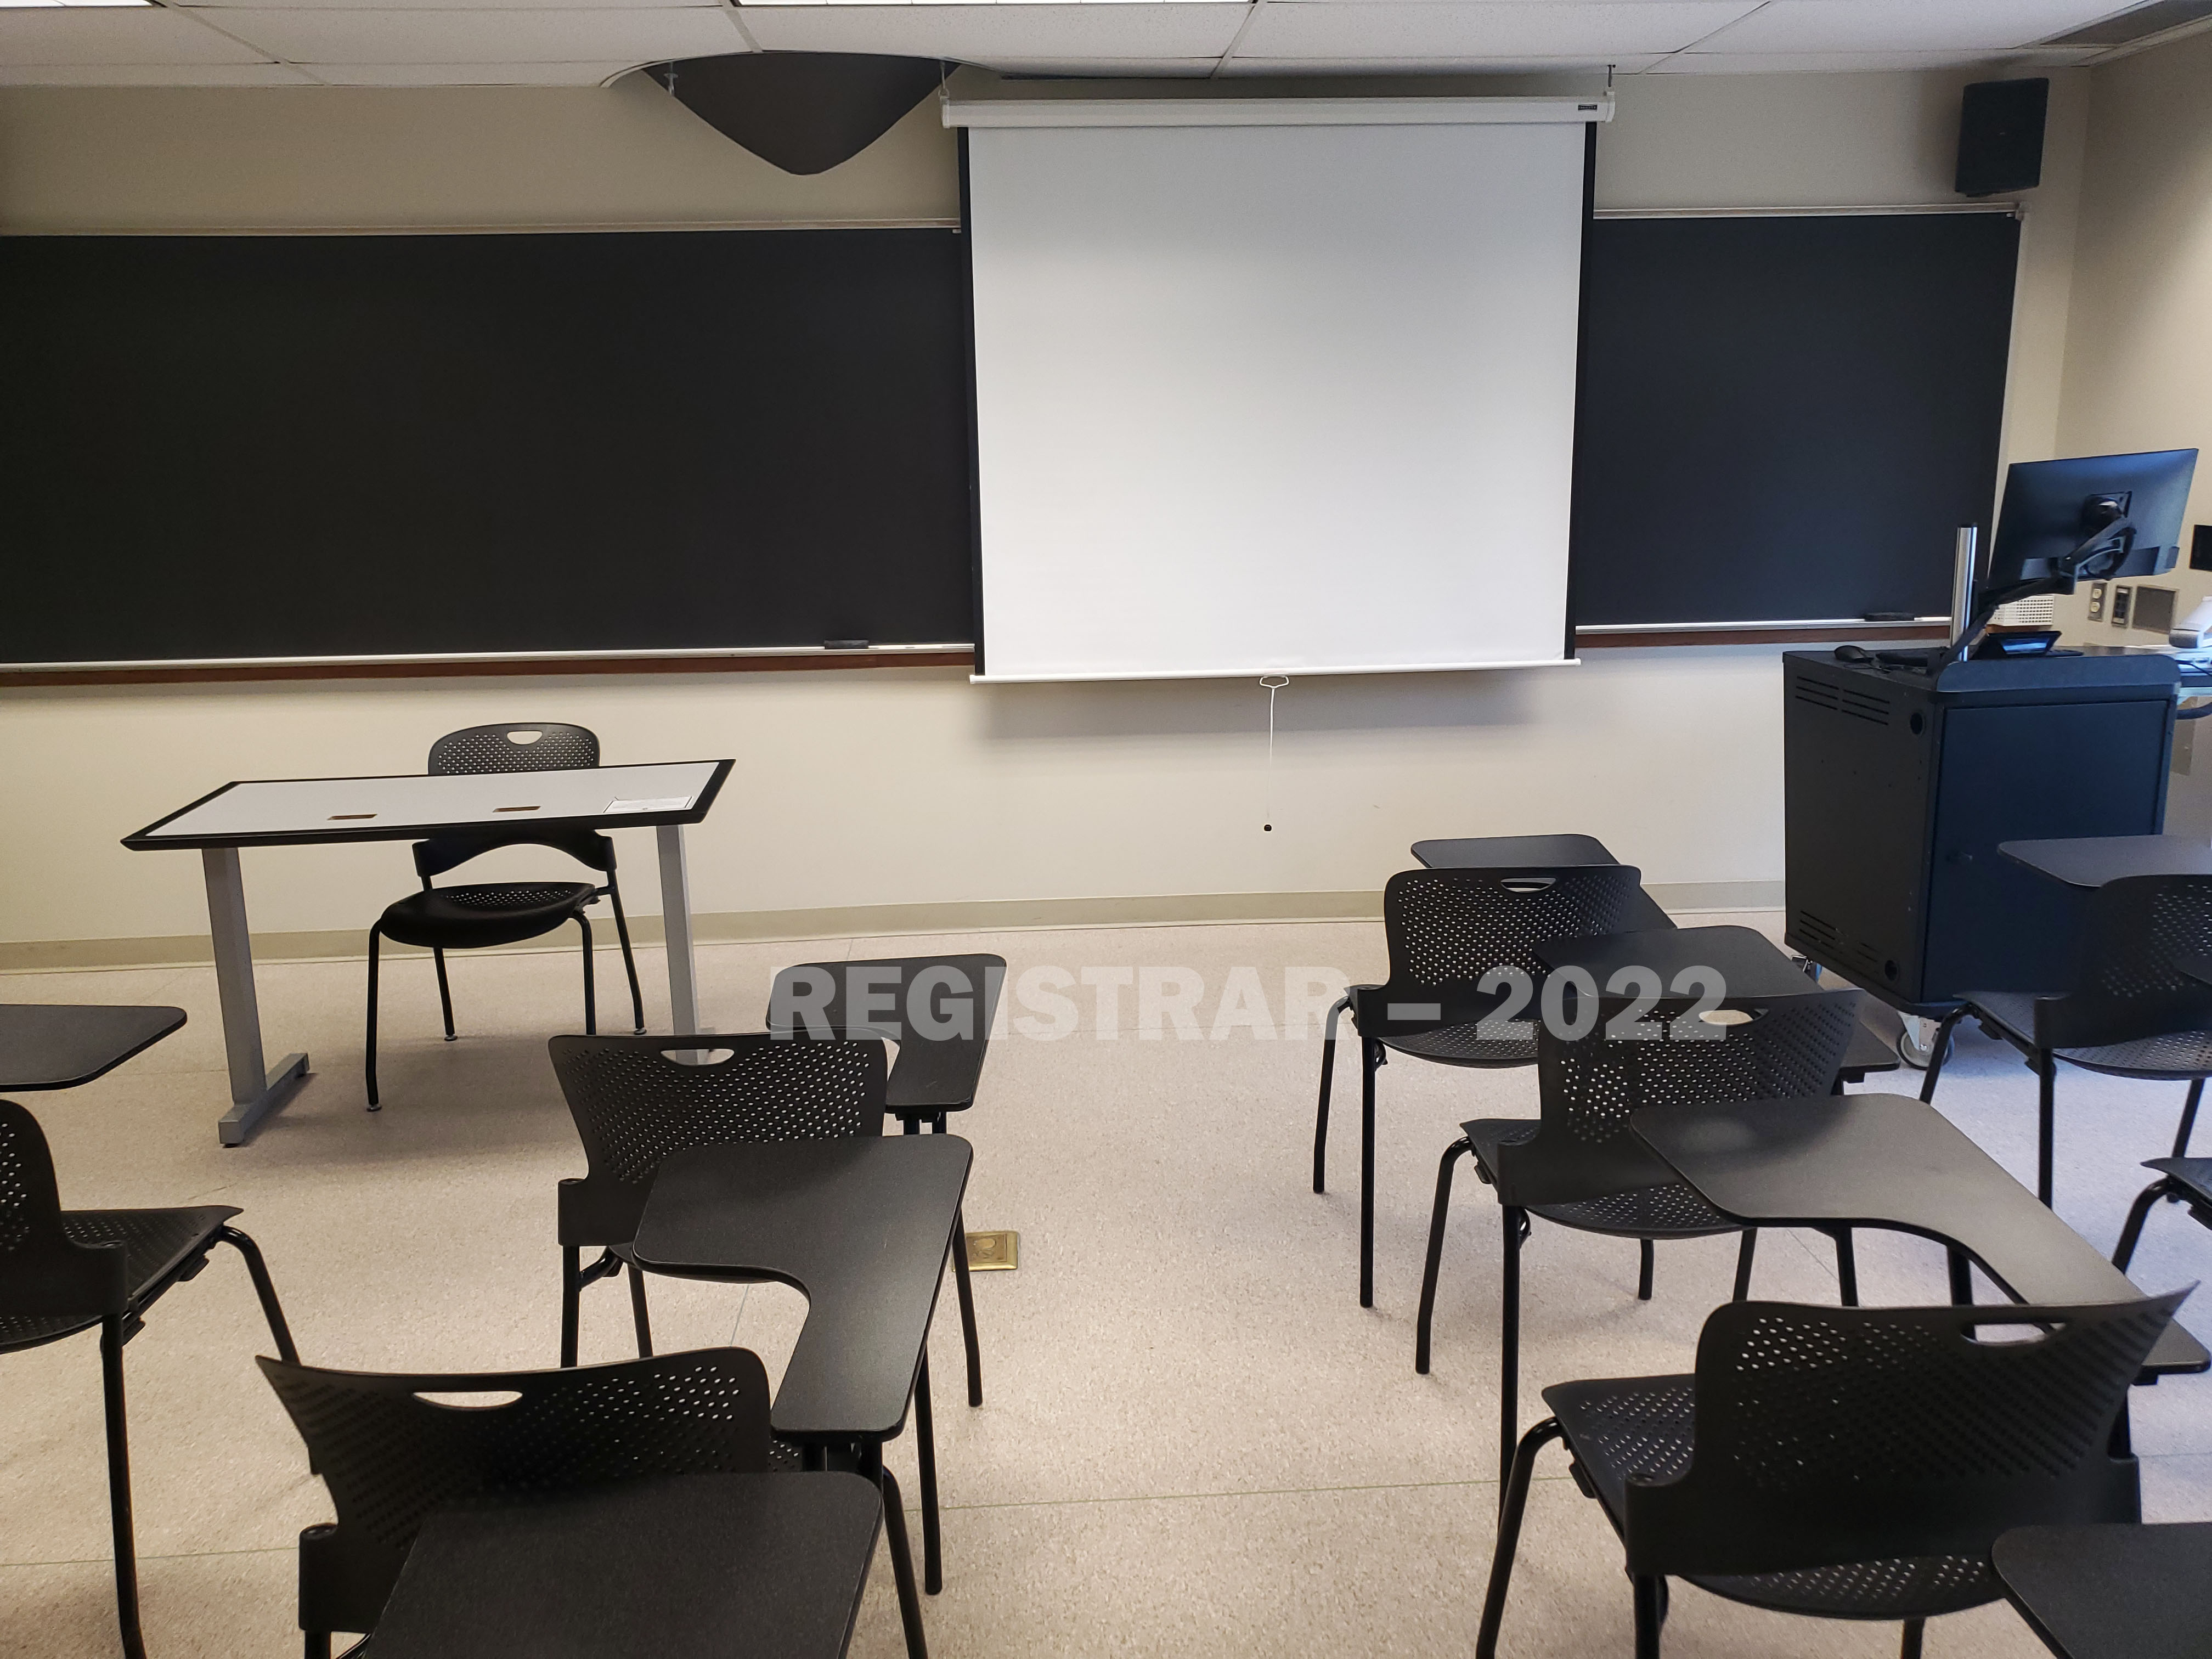 Enarson Classroom Building room 306 ultra wide angle view from the front of the room